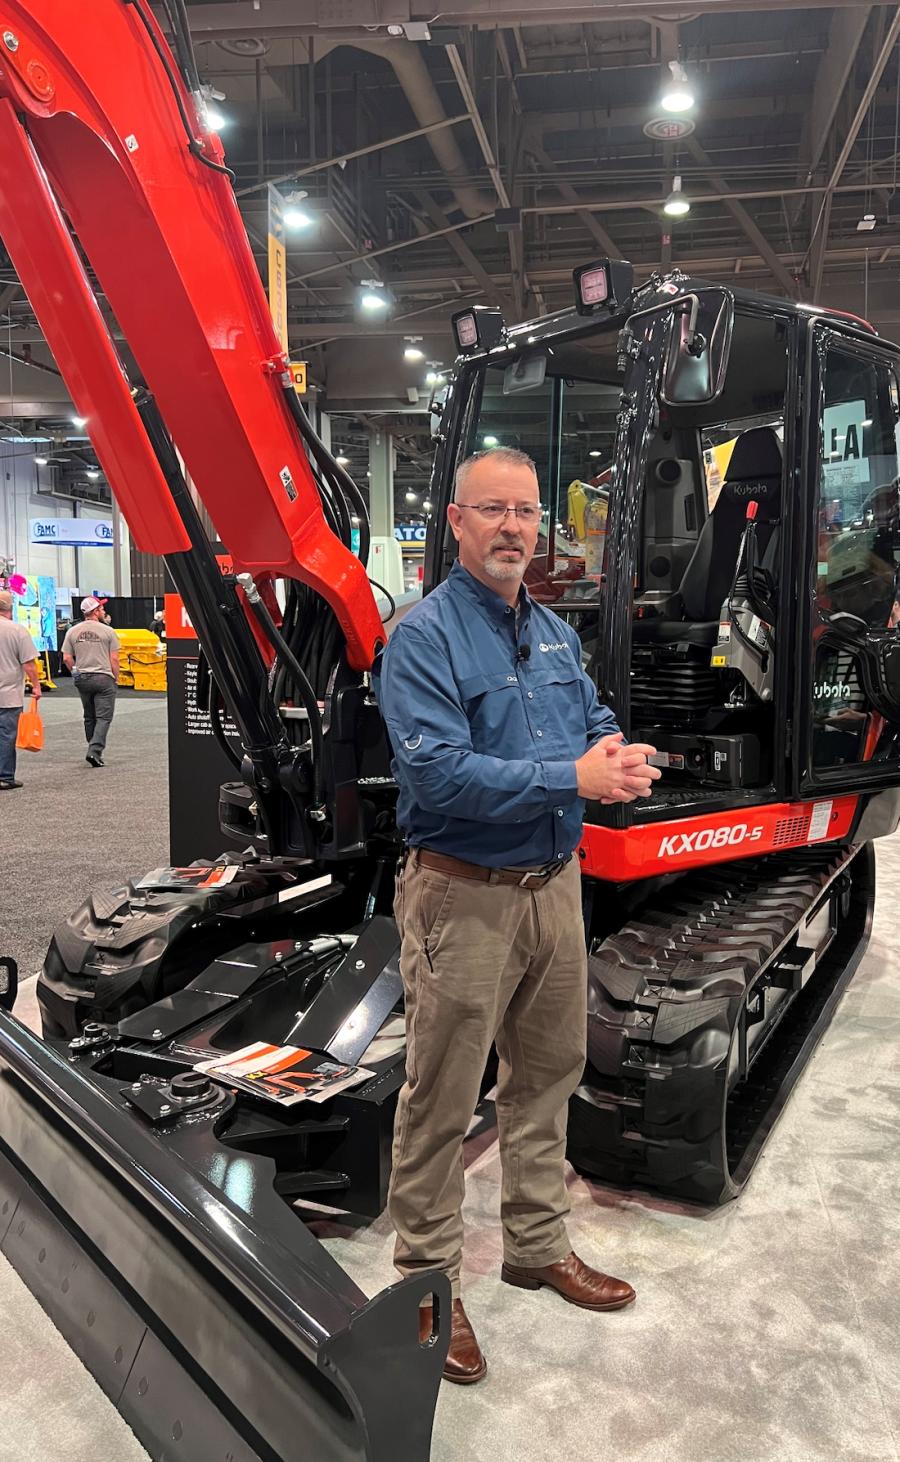 Bill Holton, Kubota product manager for construction equipment, reviews features of the KX080 mini-excavator during a press conference at World of Concrete. (CEG photo)